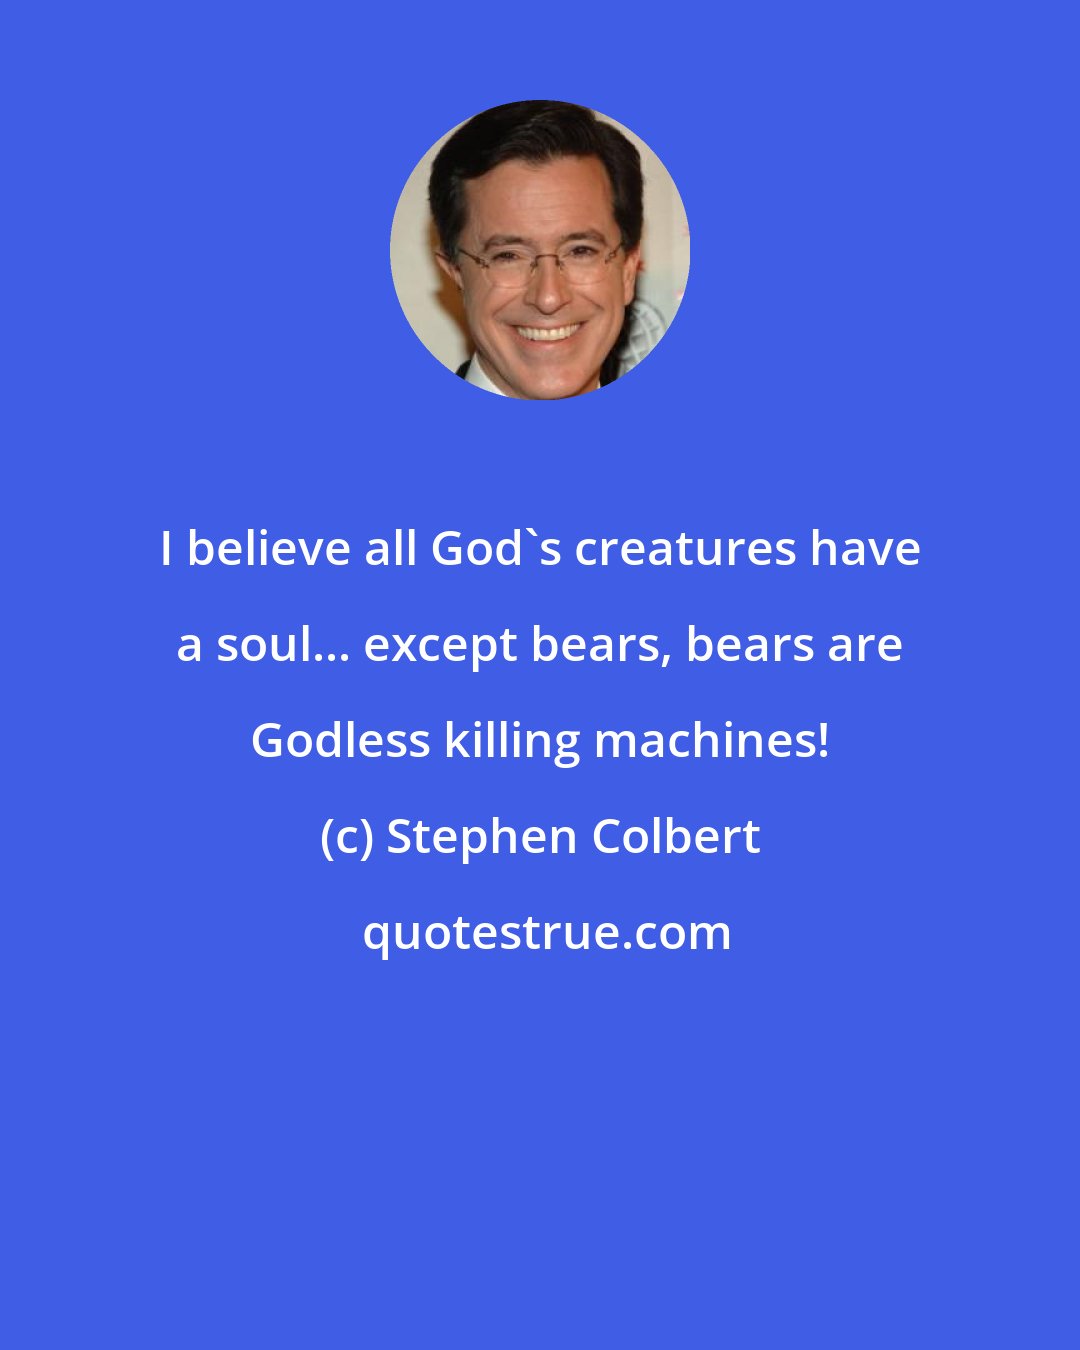 Stephen Colbert: I believe all God's creatures have a soul... except bears, bears are Godless killing machines!